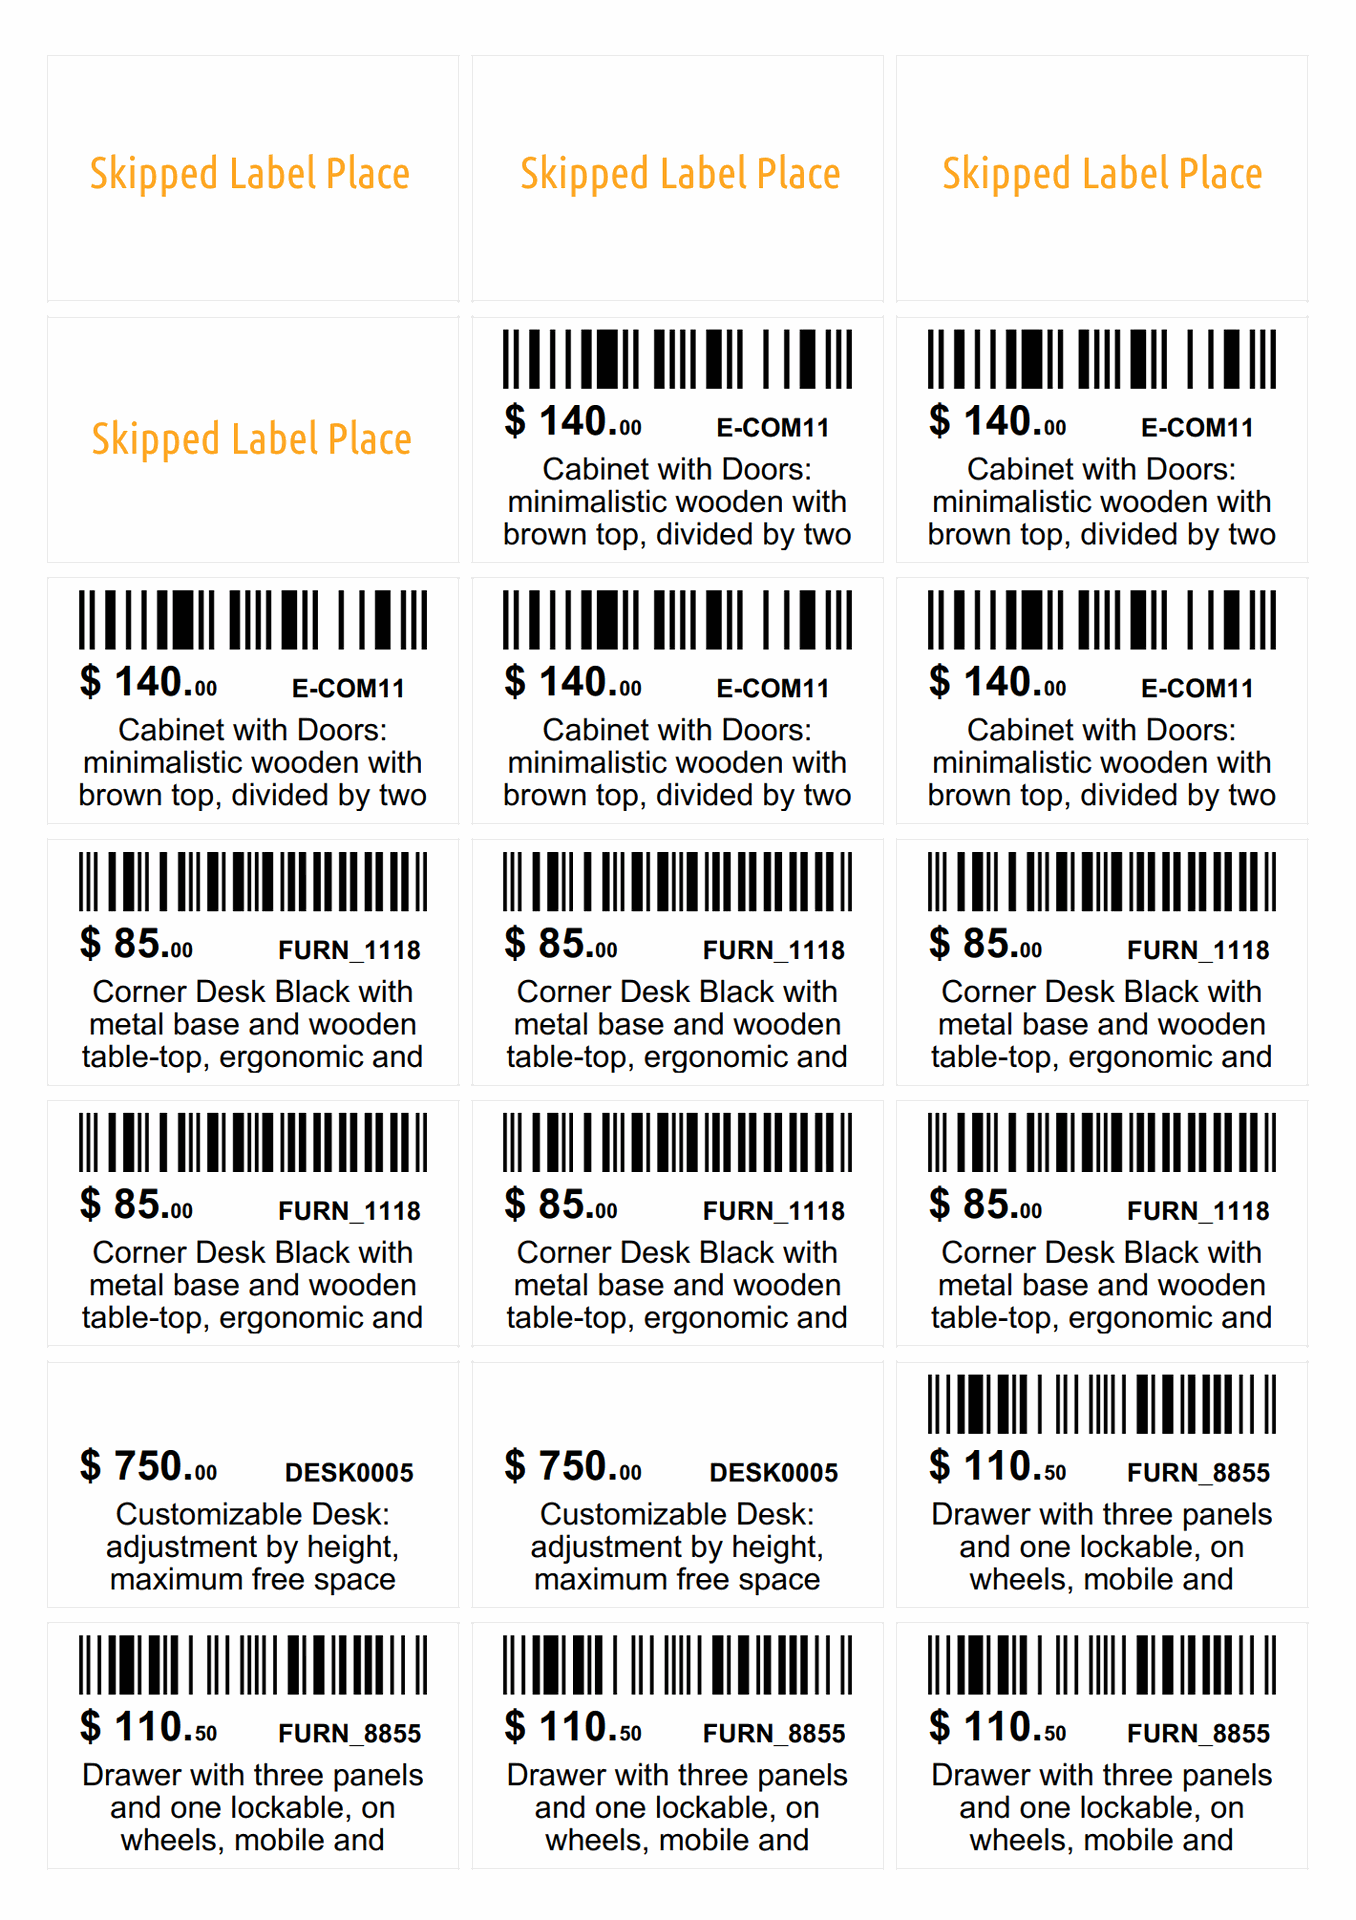 Odoo 17.0 a4 barcode product label 63 x 38 mm